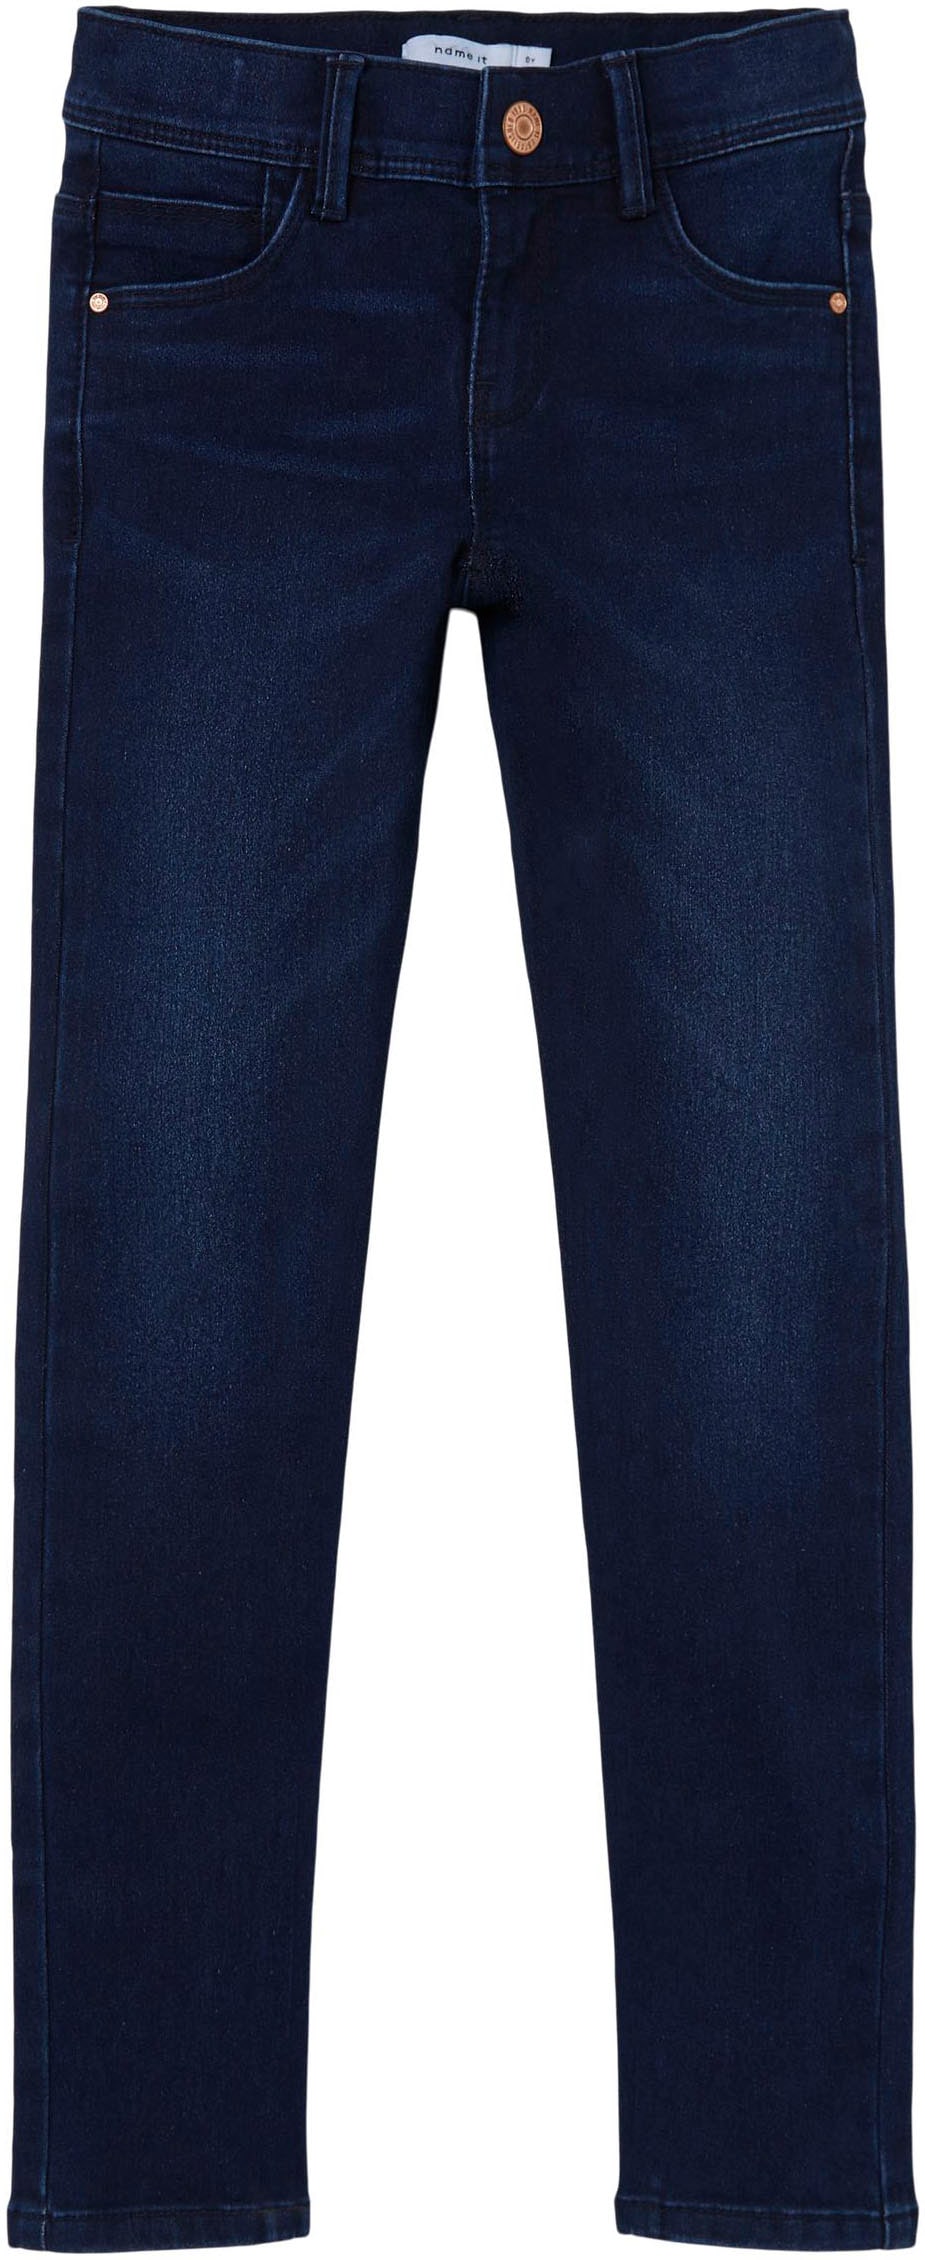 Name It DNMTAX ♕ aus Stretchdenim PANT«, bequemem Stretch-Jeans »NKFPOLLY bei